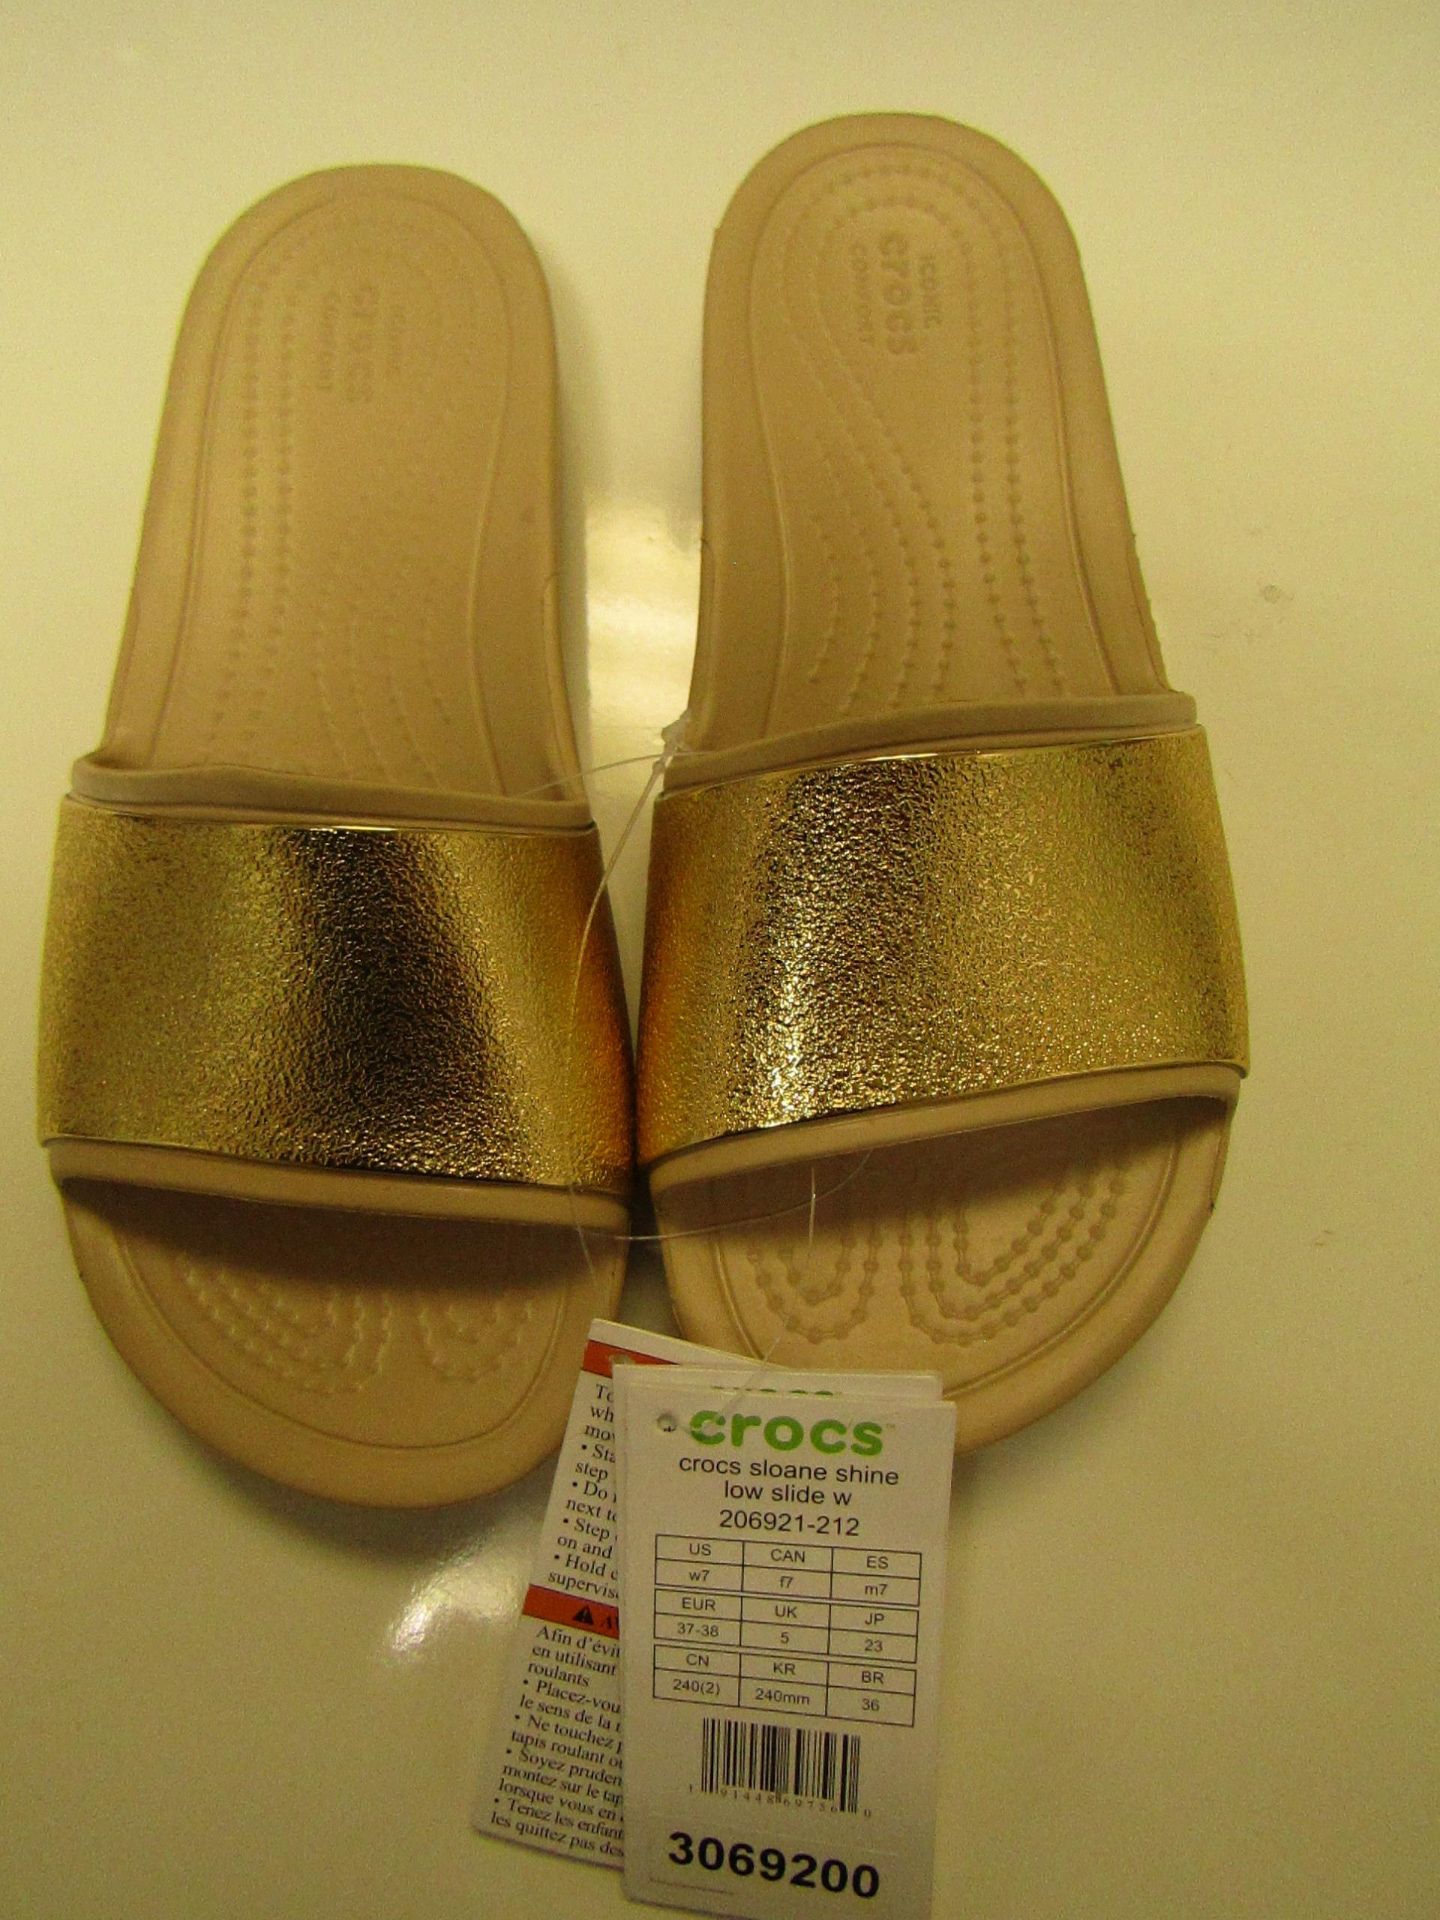 Crocs Sloane Low Sliders - UK Size 5 - Gold & Cream RRP £29.99 New With Tags